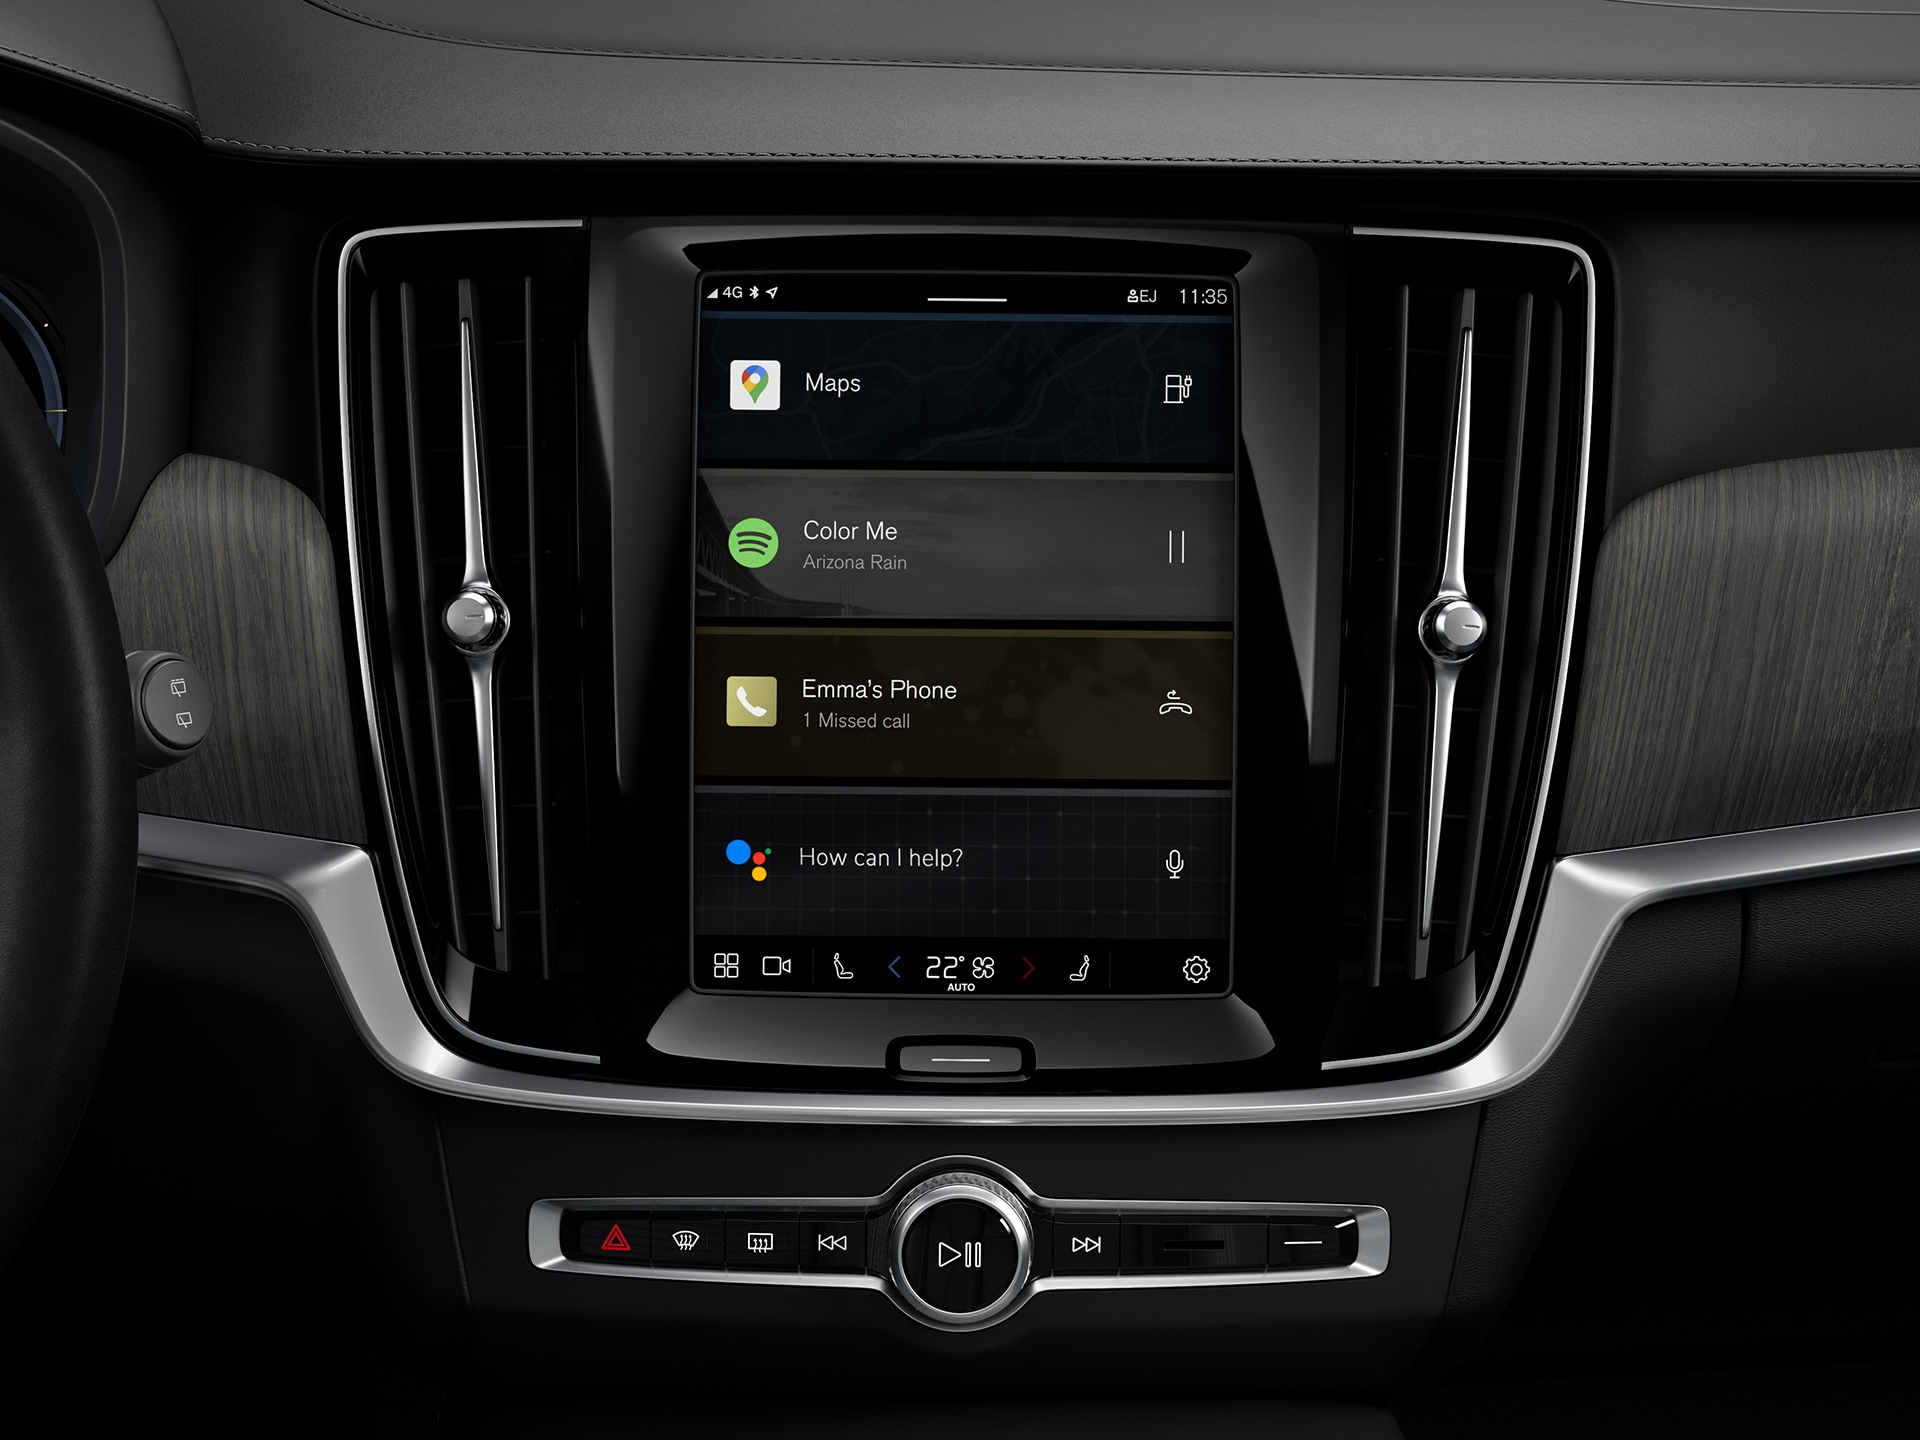 Centre console in a Volvo estate showing the built in Google infotainment system. 